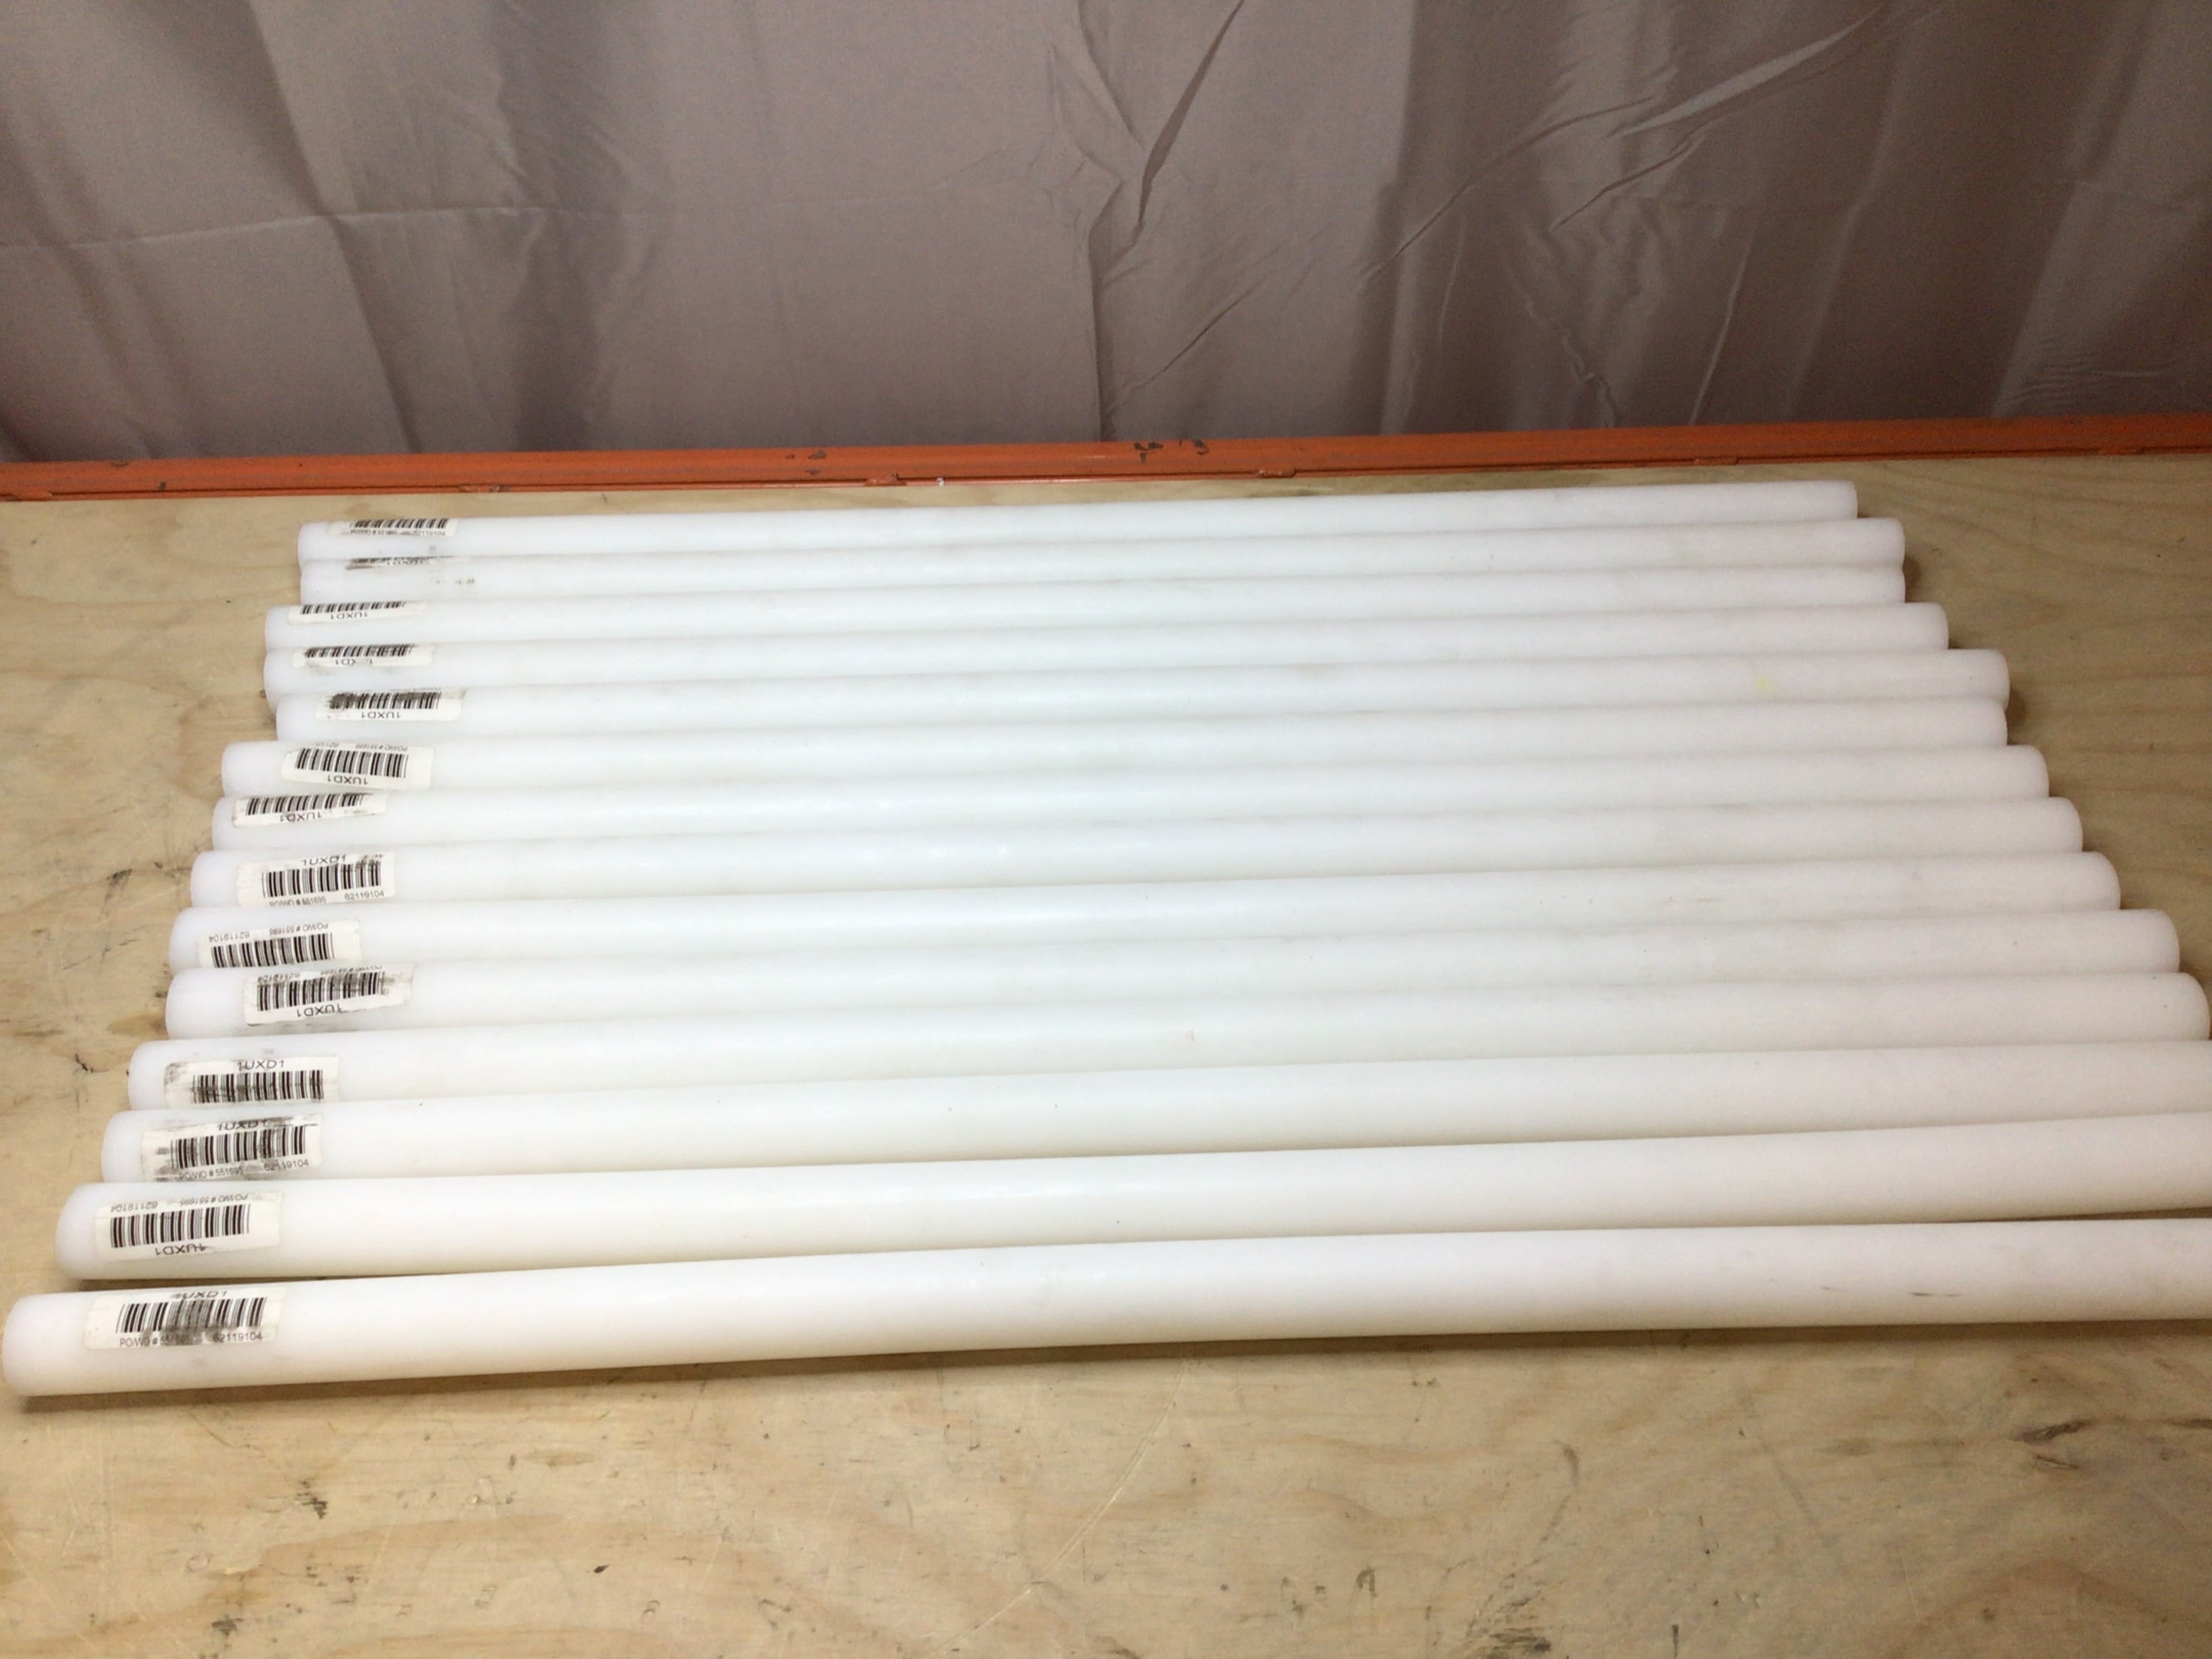 Plastic Rod 3 ft White Opaque 5800 psi Tensile Strength -22° to 180°F (14 rods) (8132142465262)